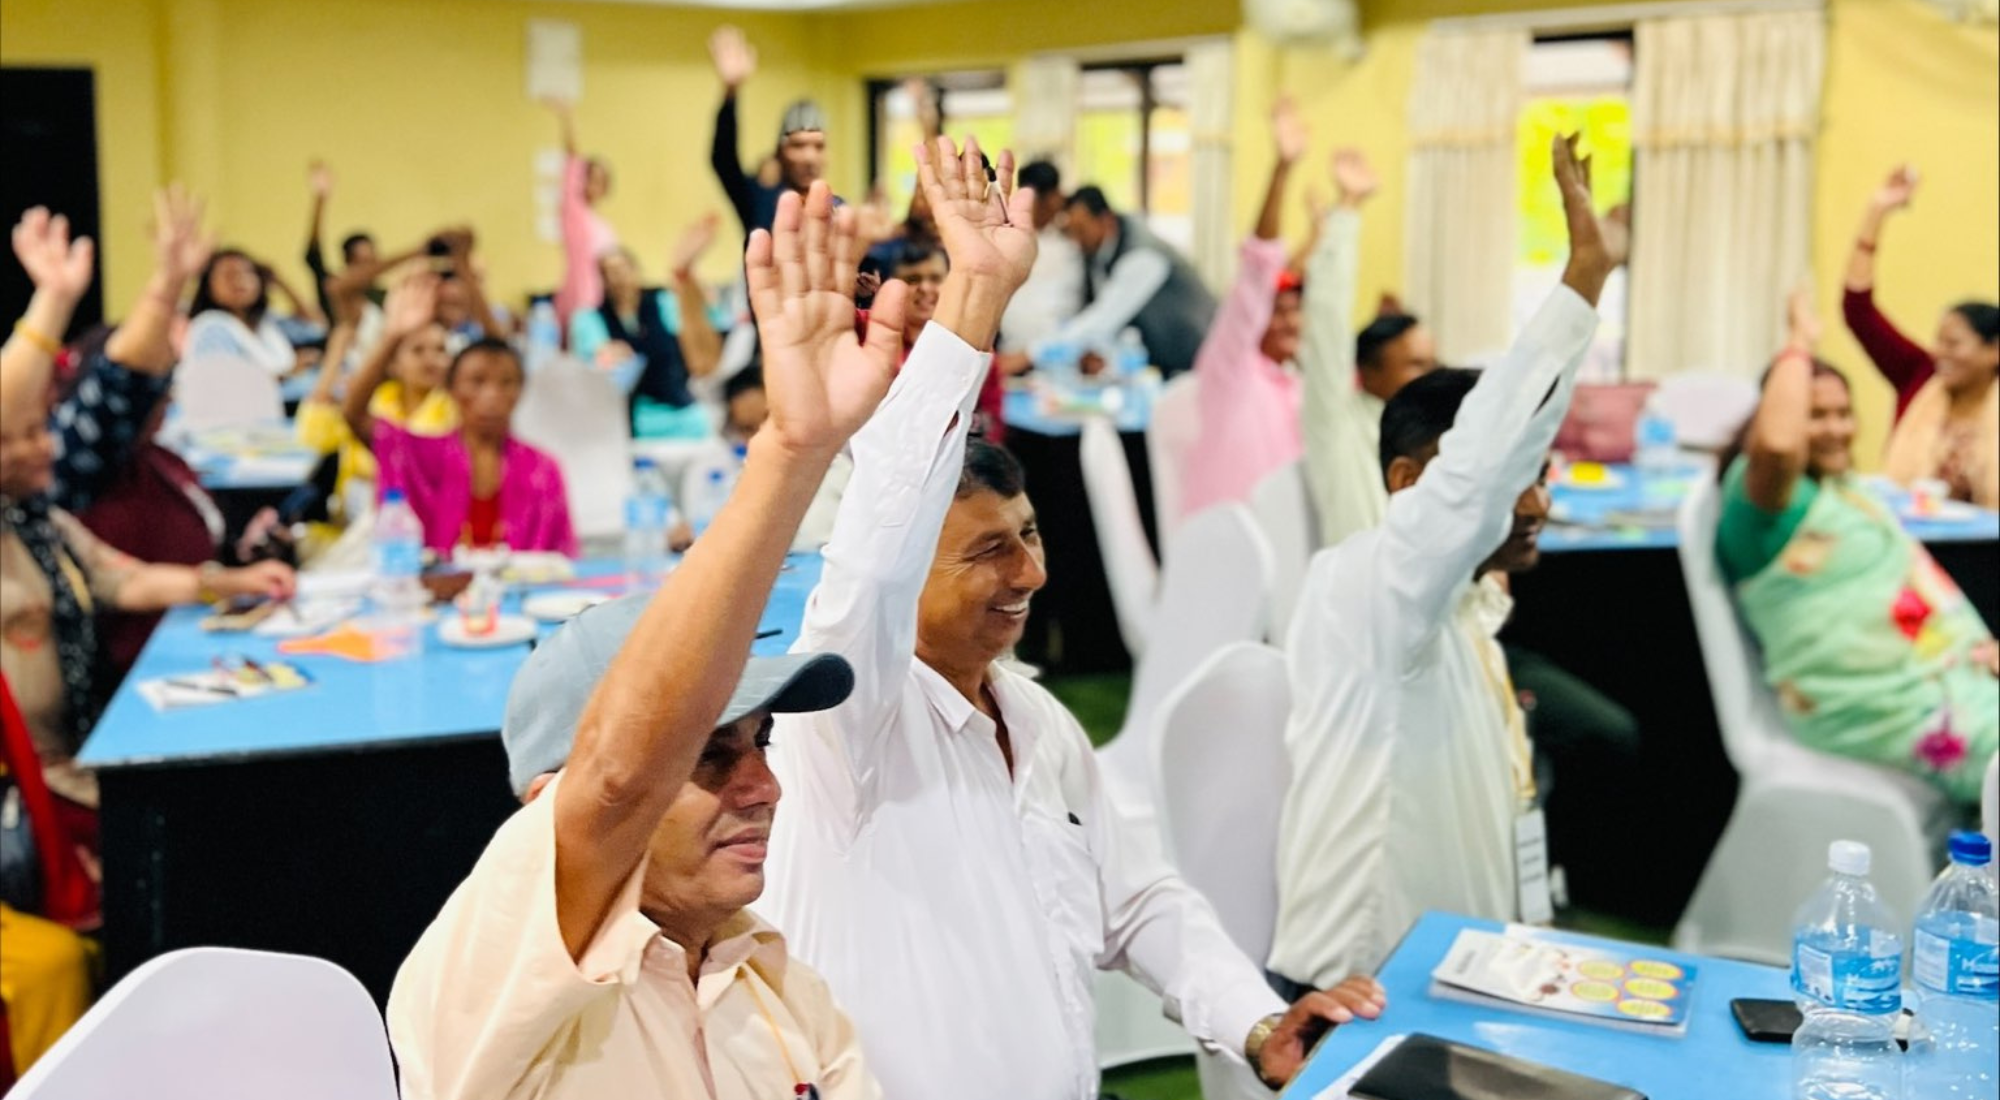 Members of organisations in Nepal attending a workshop. They are sitting and many are smiling with one hand raised.